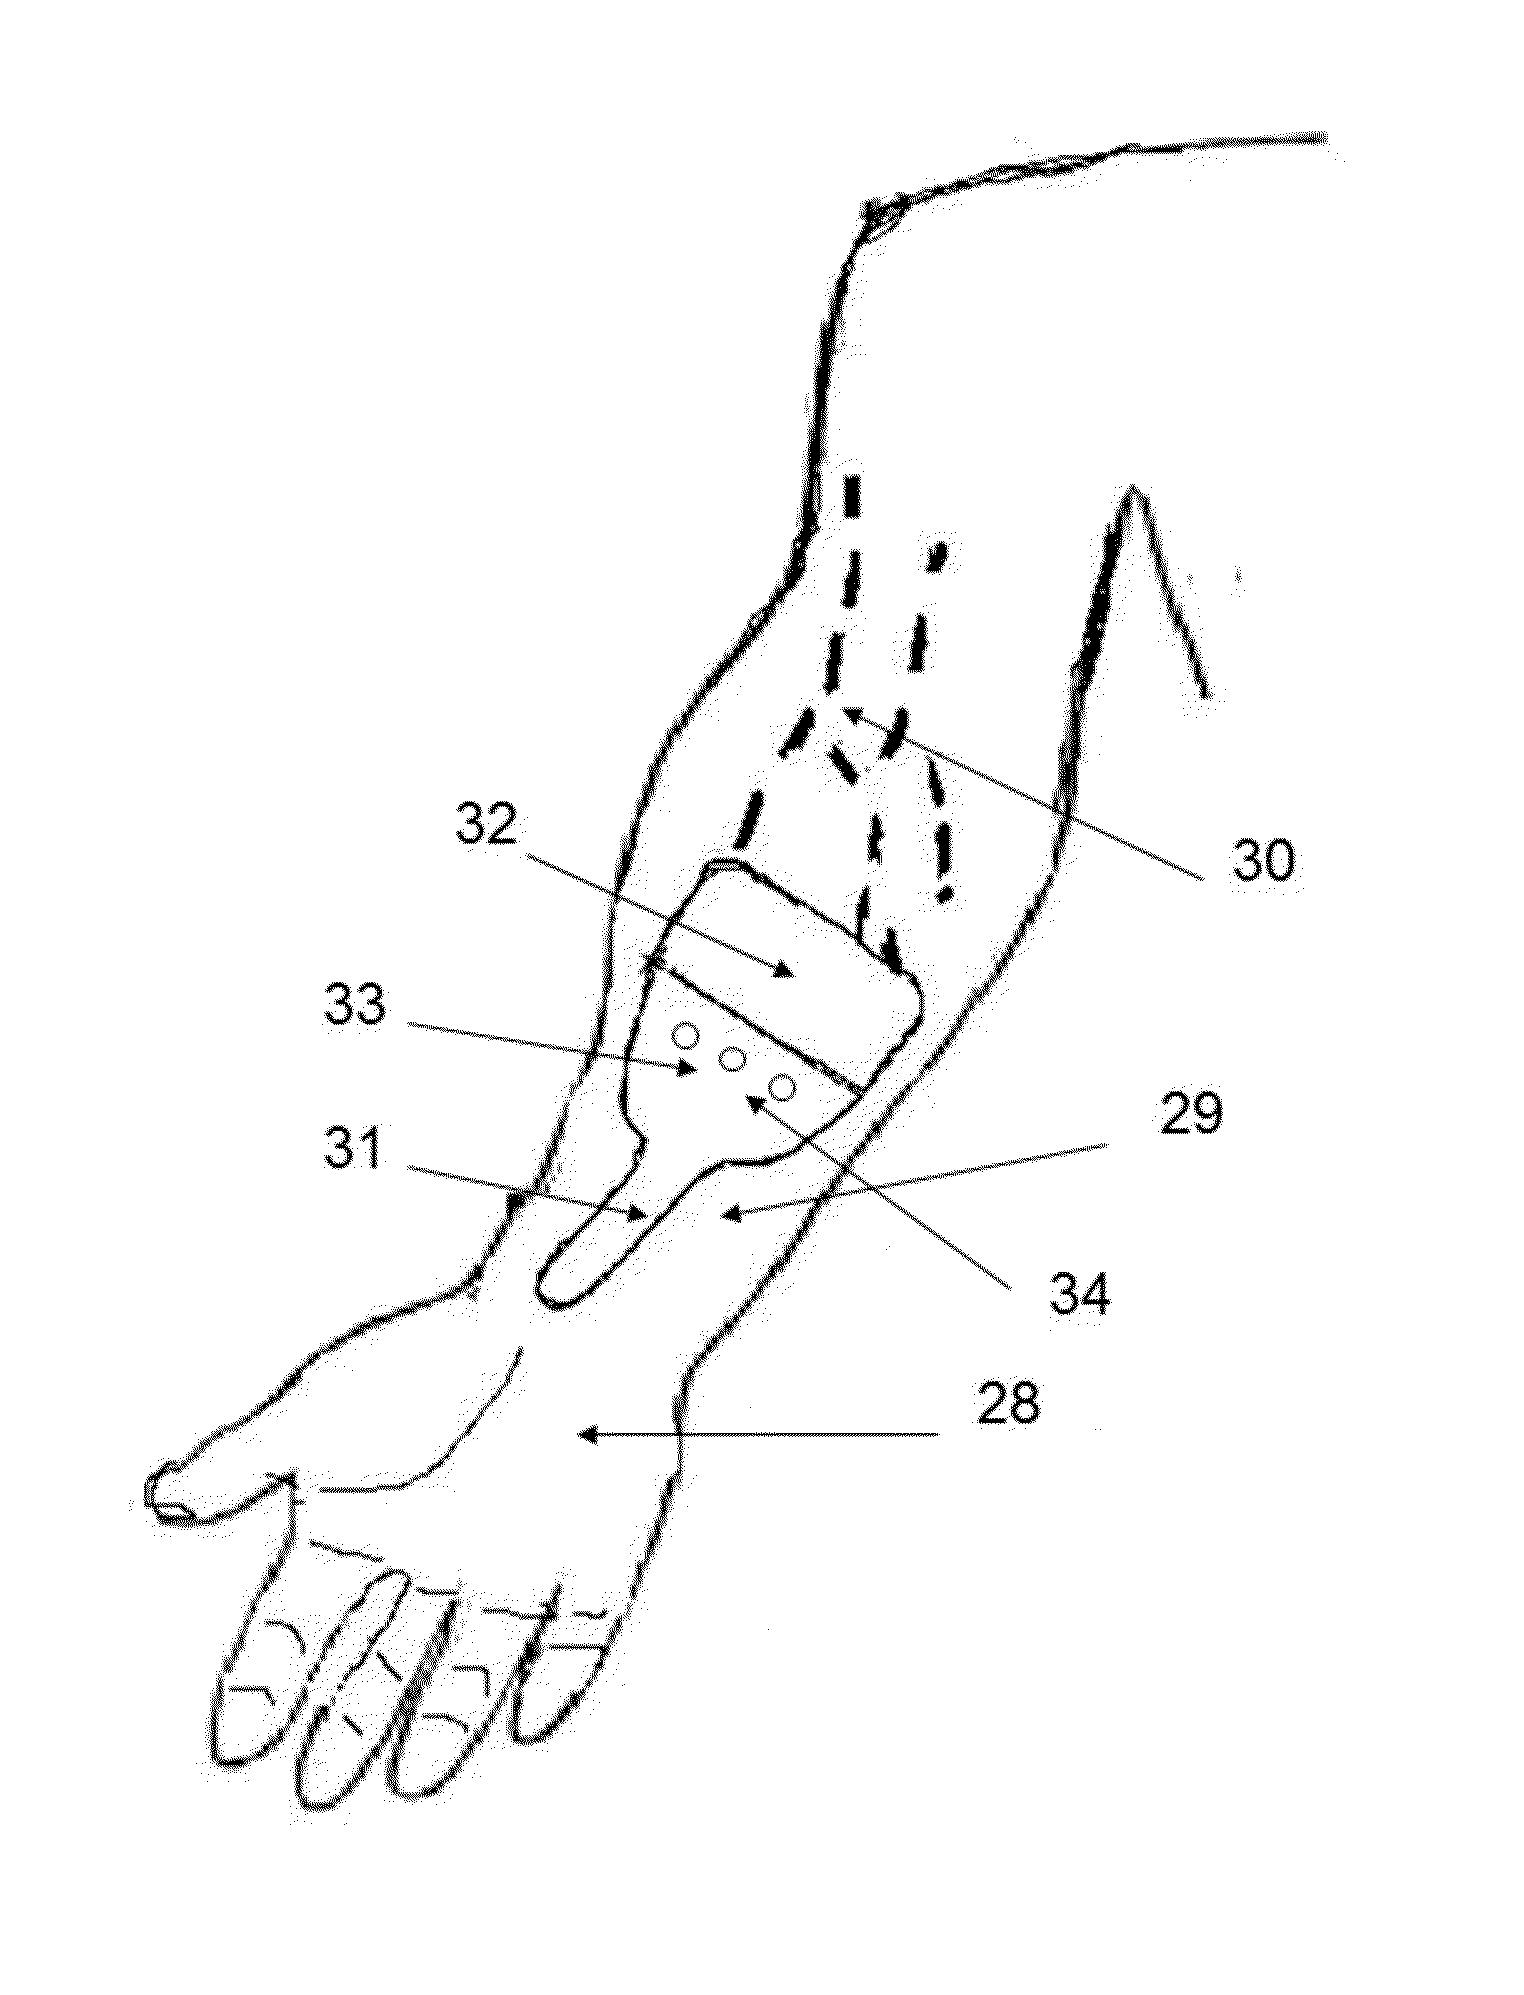 Device, system and method for blood vessel imaging and marking